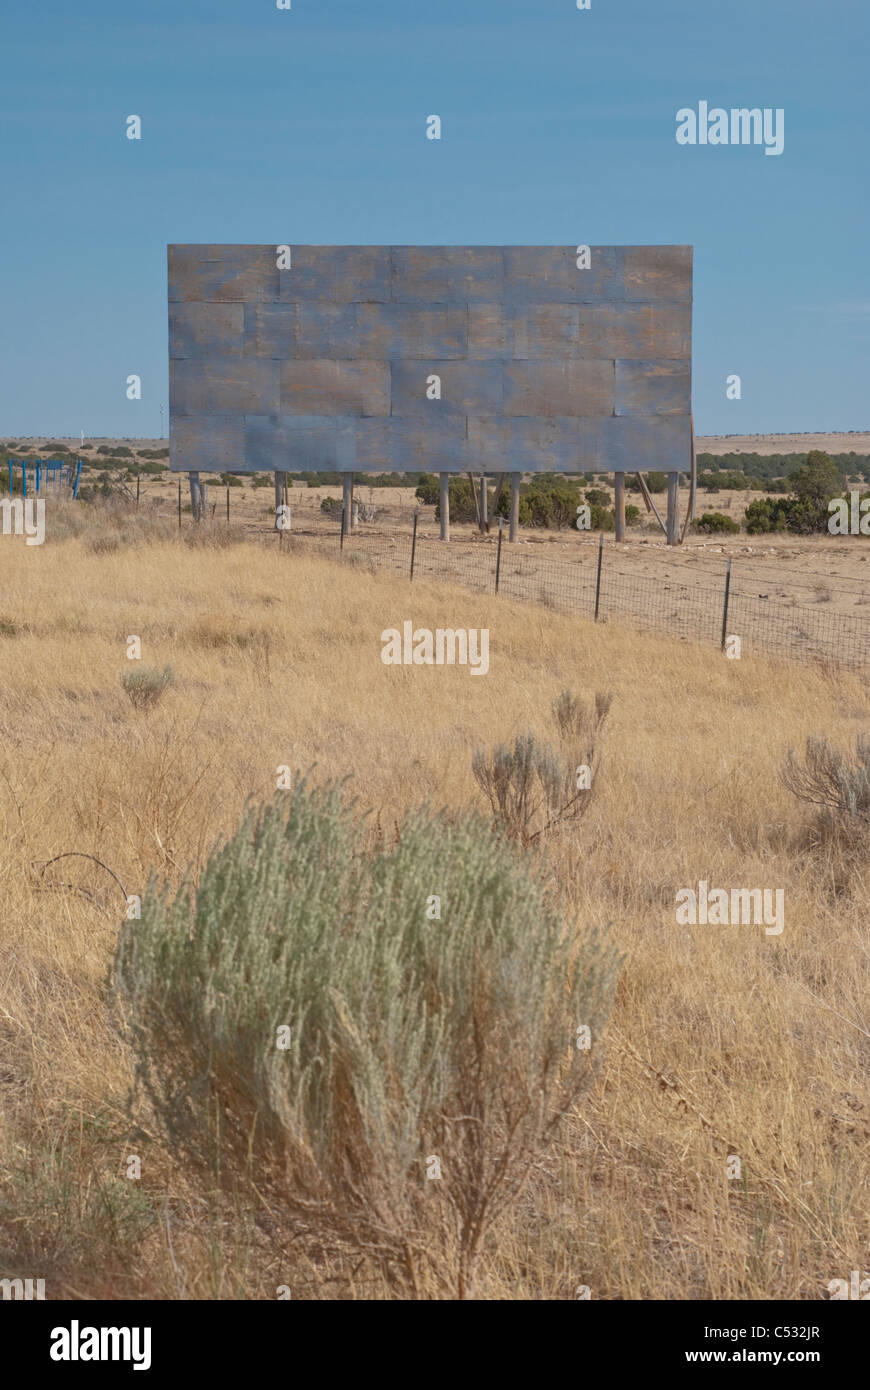 An empty billboard awaits a creative advertisement on the side of the road in rural New Mexico. Stock Photo